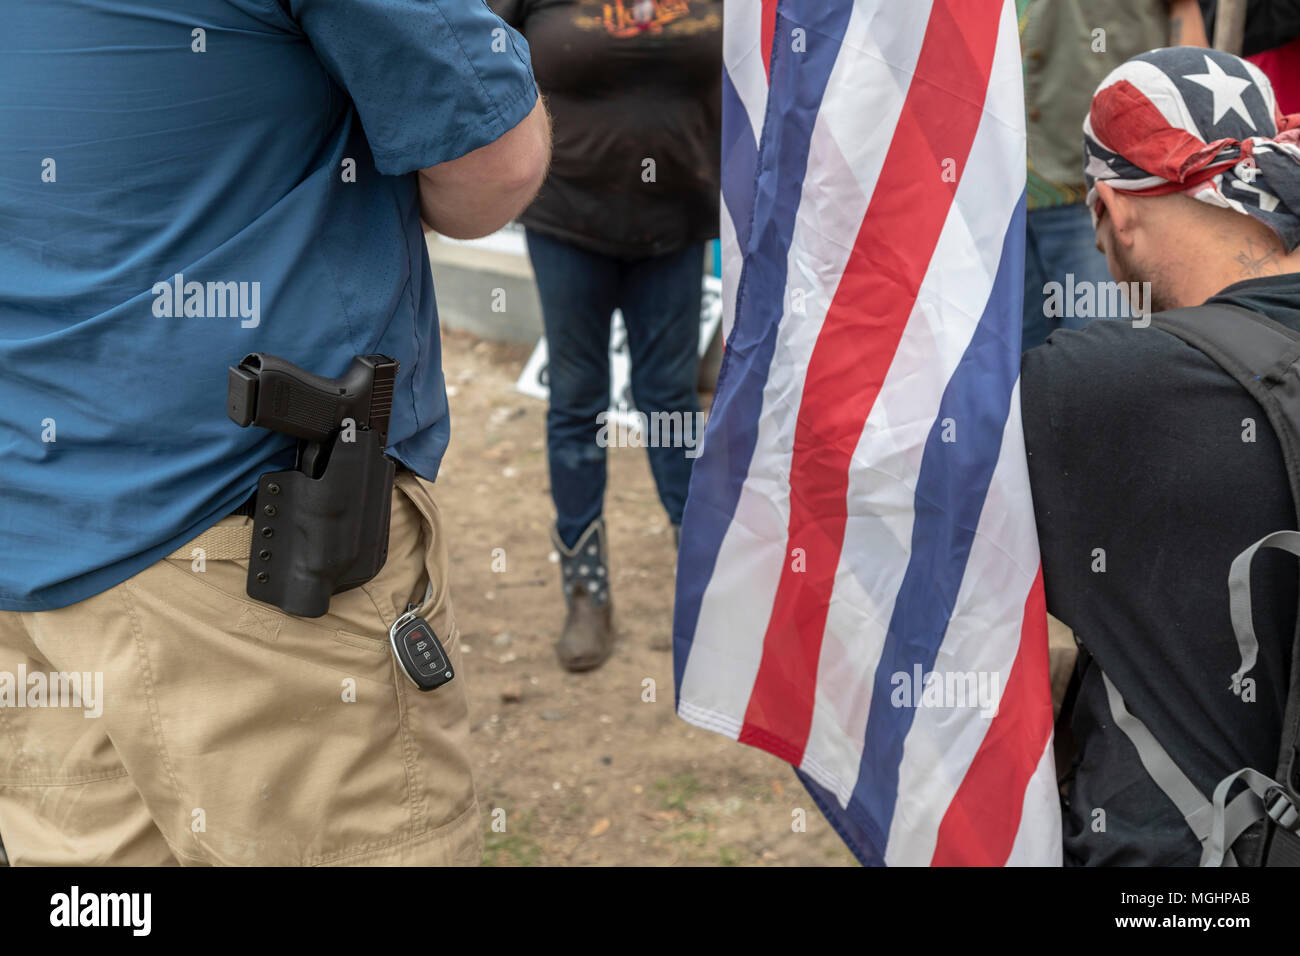 New Orleans, Louisiana - Carrying various Confederate flags, a small group, some of them armed, prays at the site where a statue of Jefferson Davis wa Stock Photo